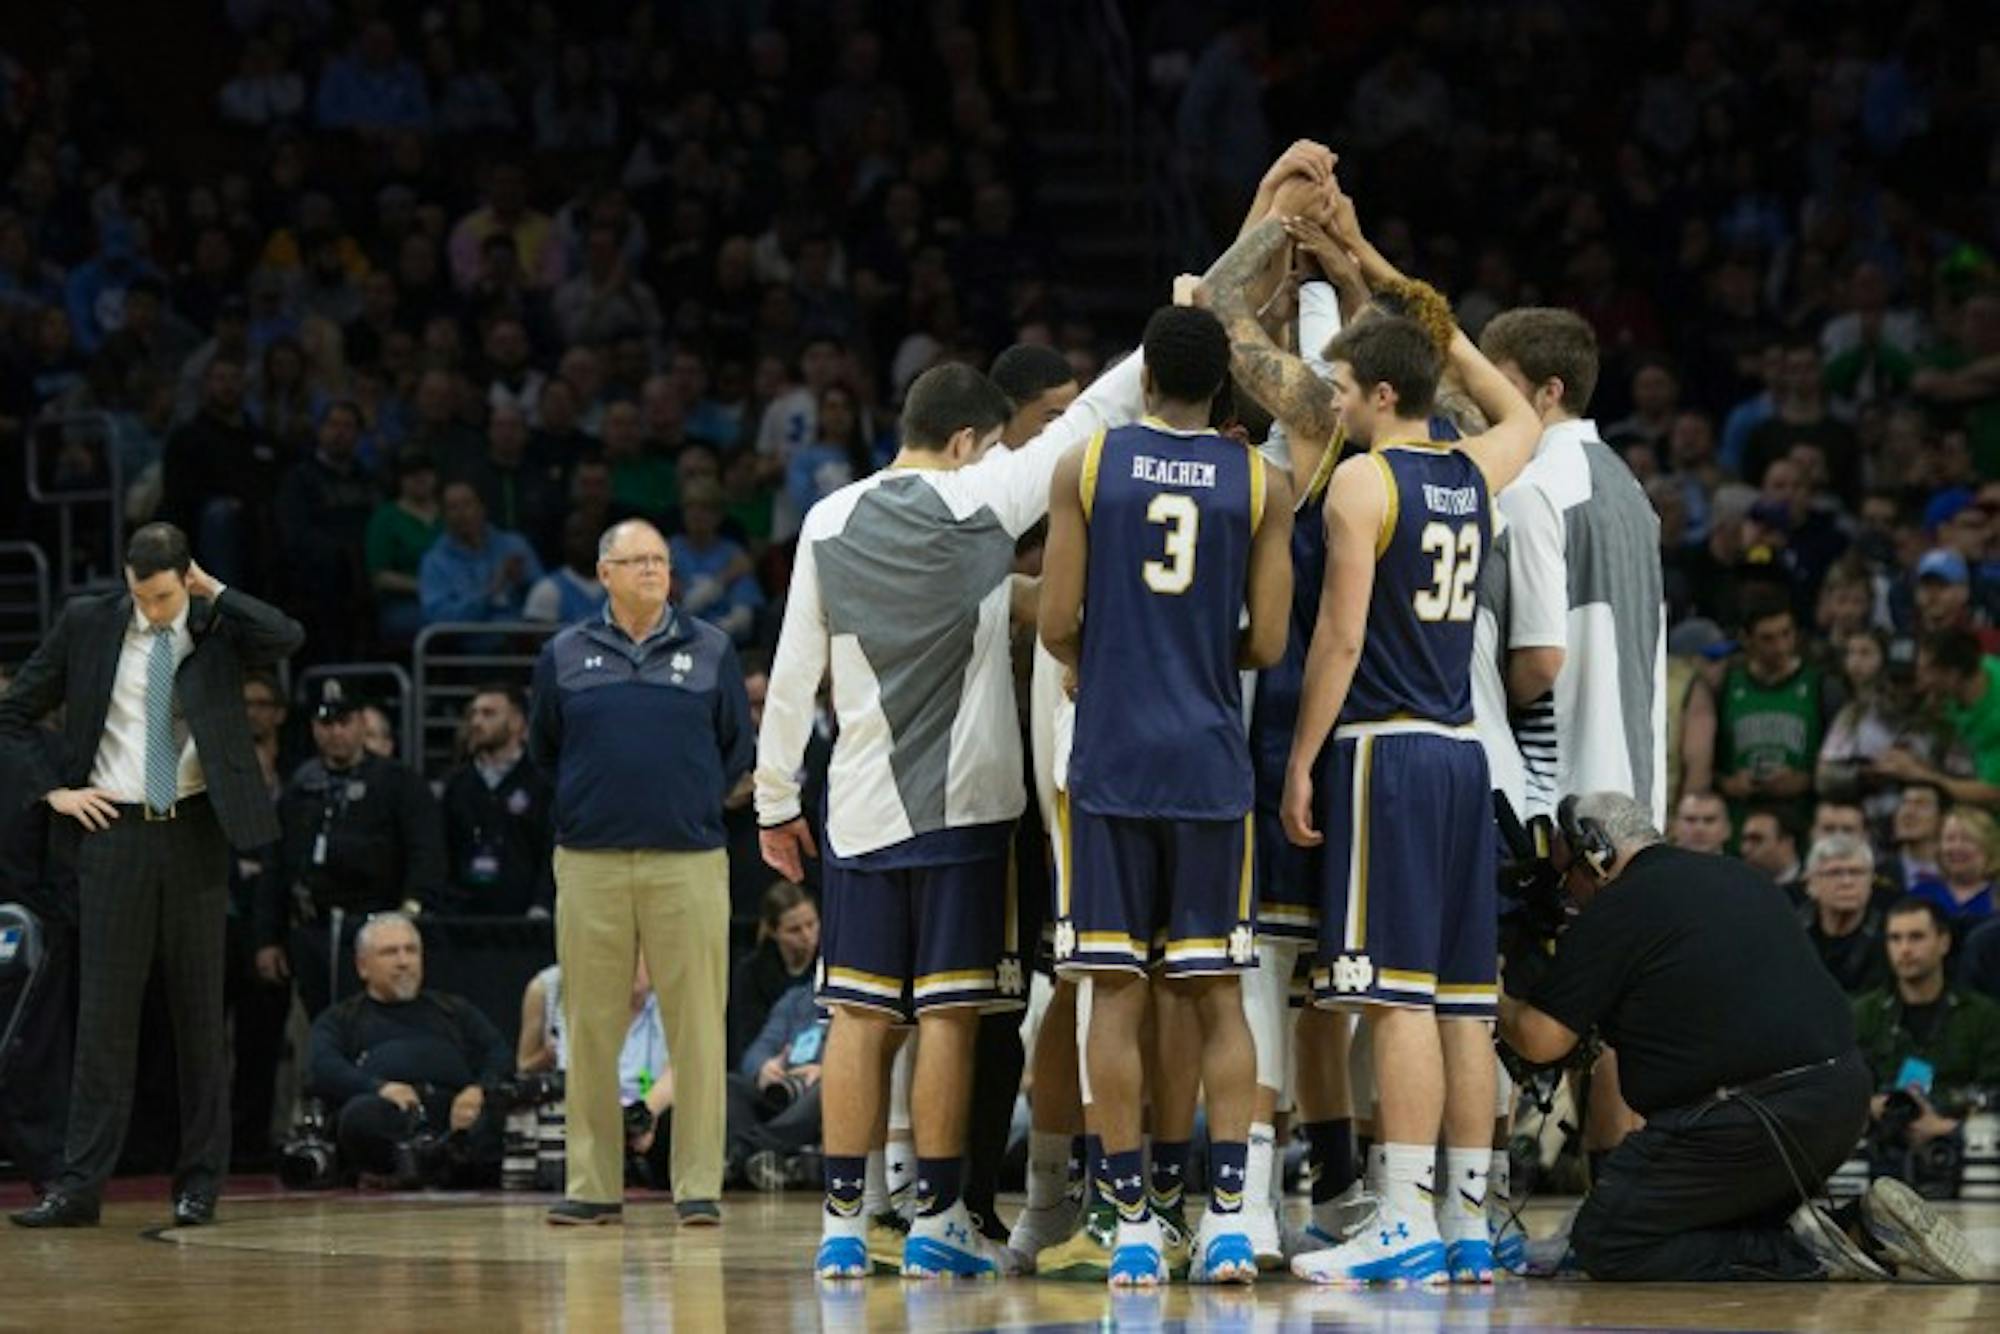 Notre Dame players huddle before their 88-74 loss to North Carolina on Sunday night in Philadelphia.